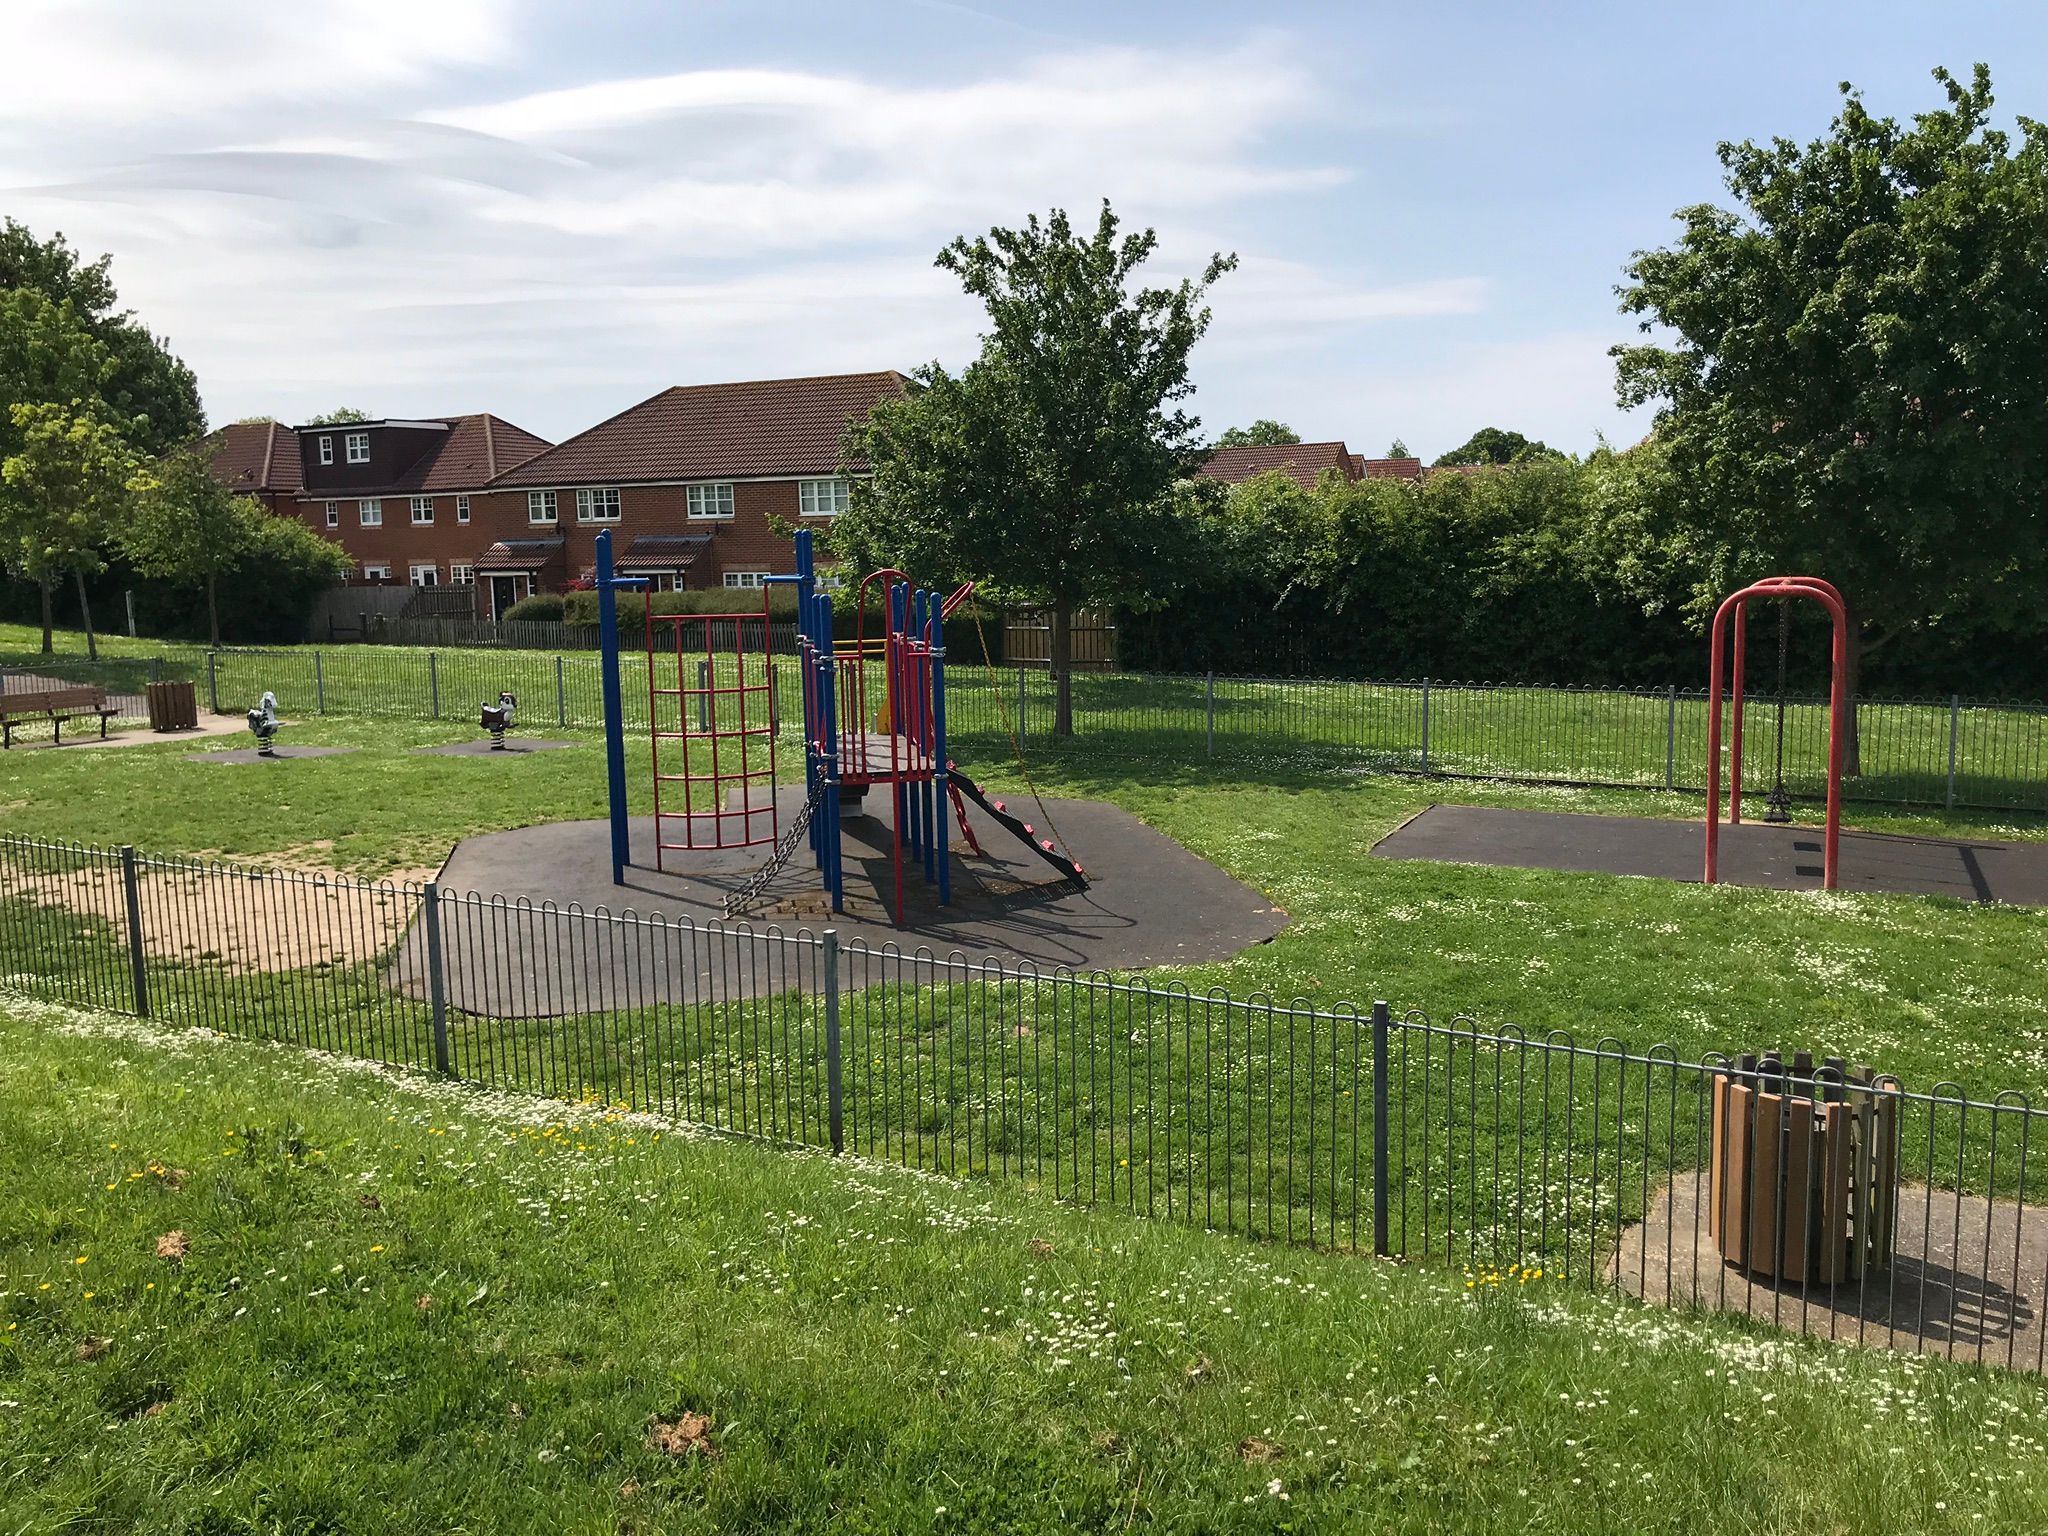 second play area with climbing frame and swings.